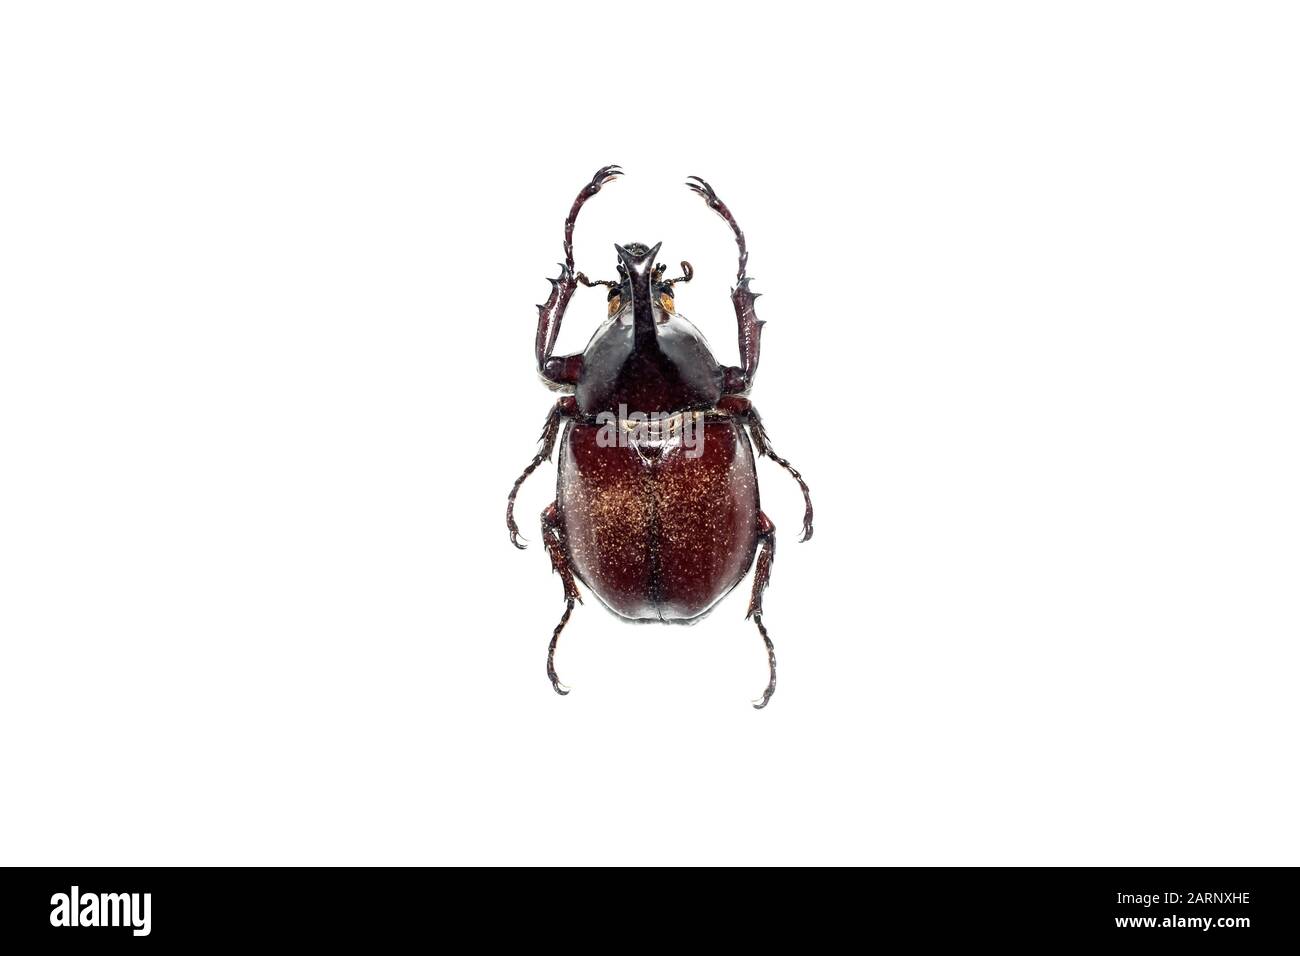 Big brown beetle, isolate on a white background, chalcosoma caucasus Stock Photo